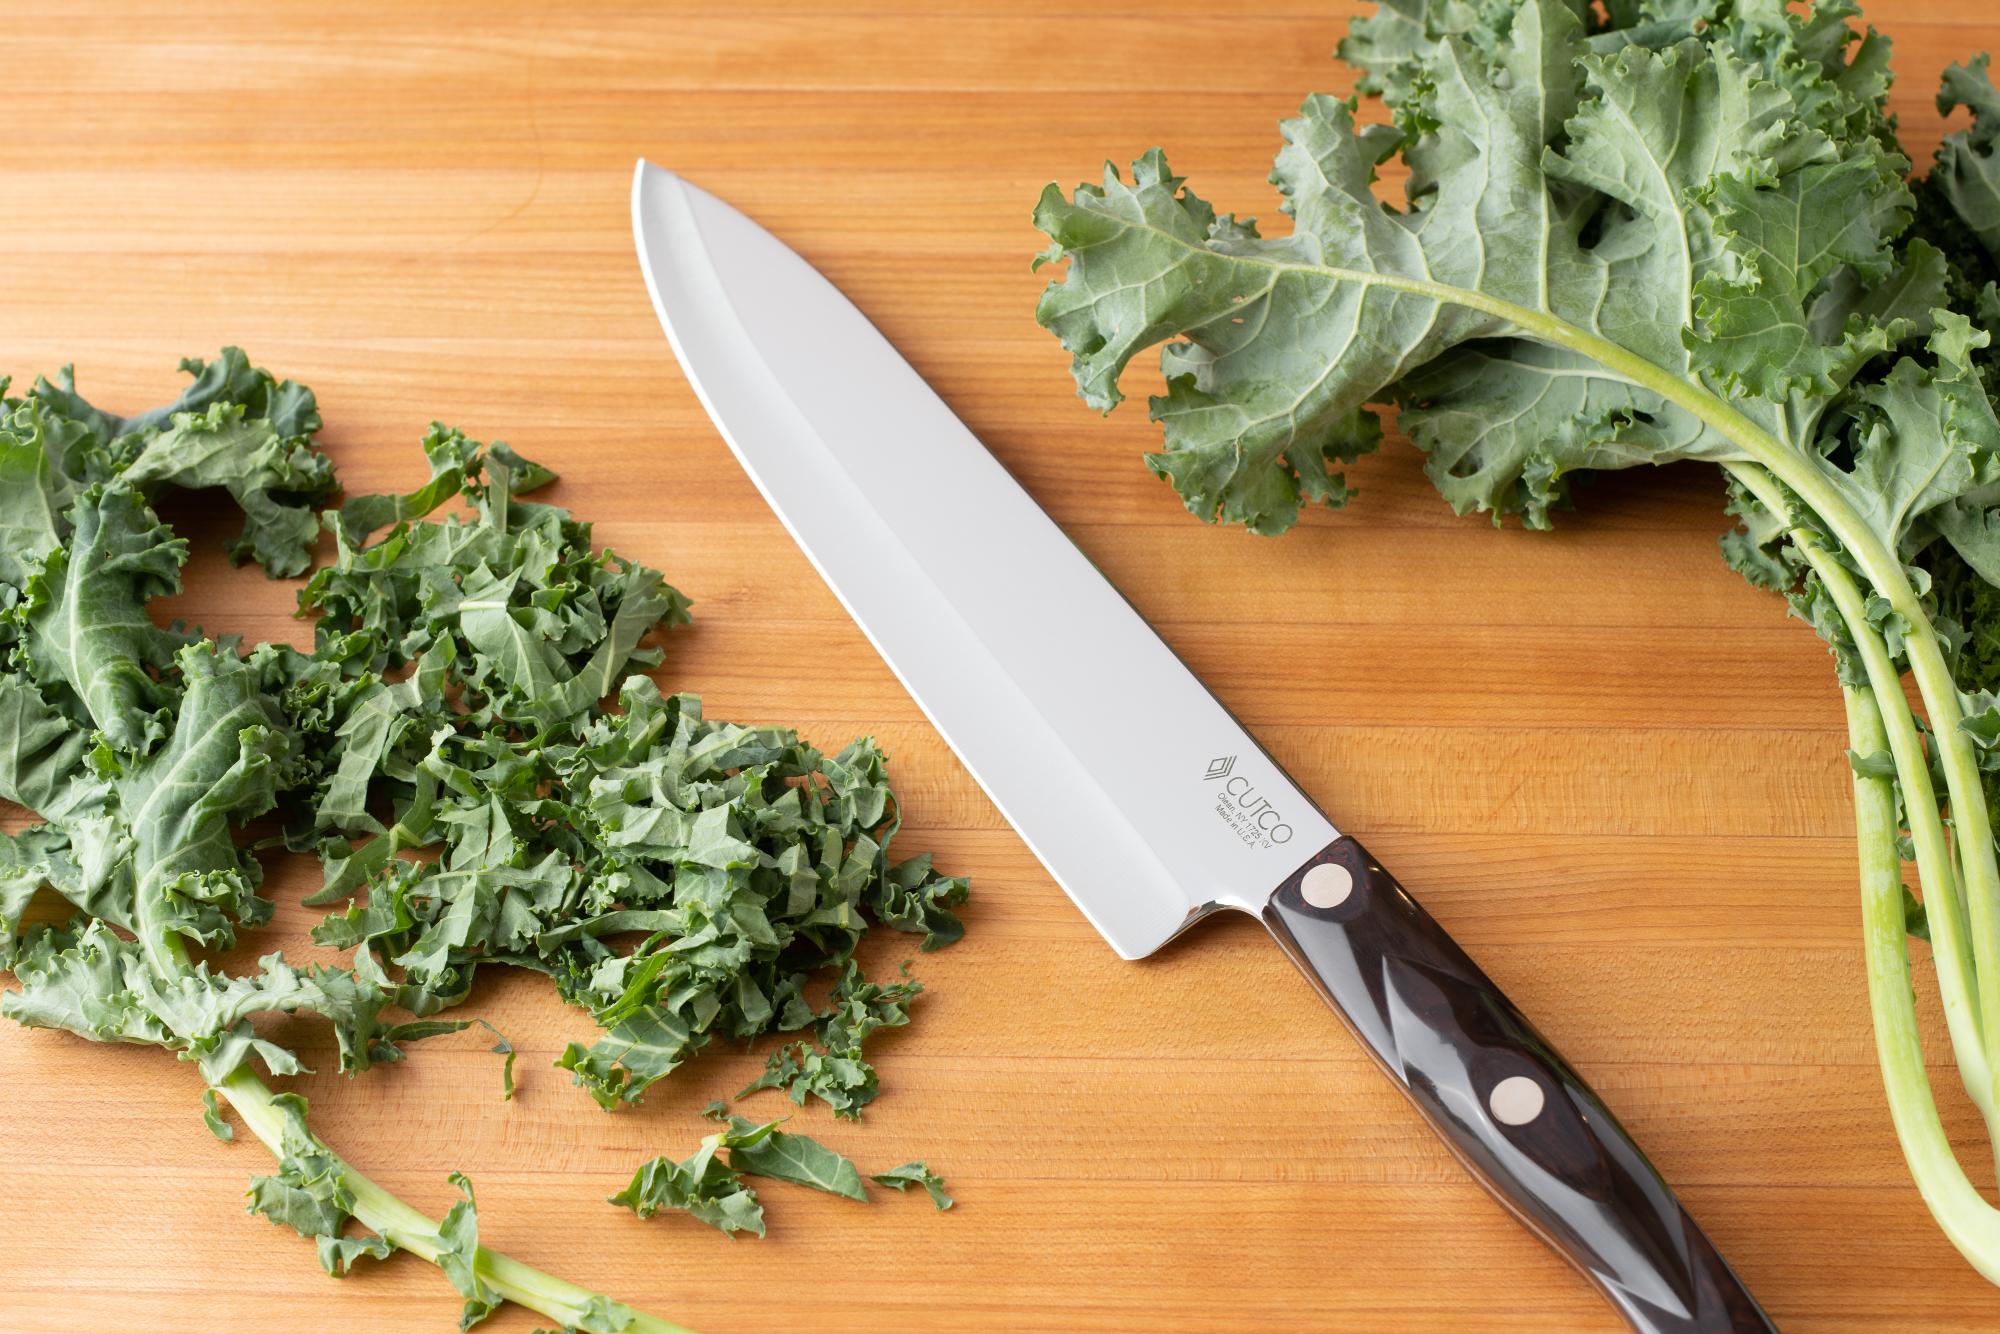 Prep the kale with a Petite Chef.